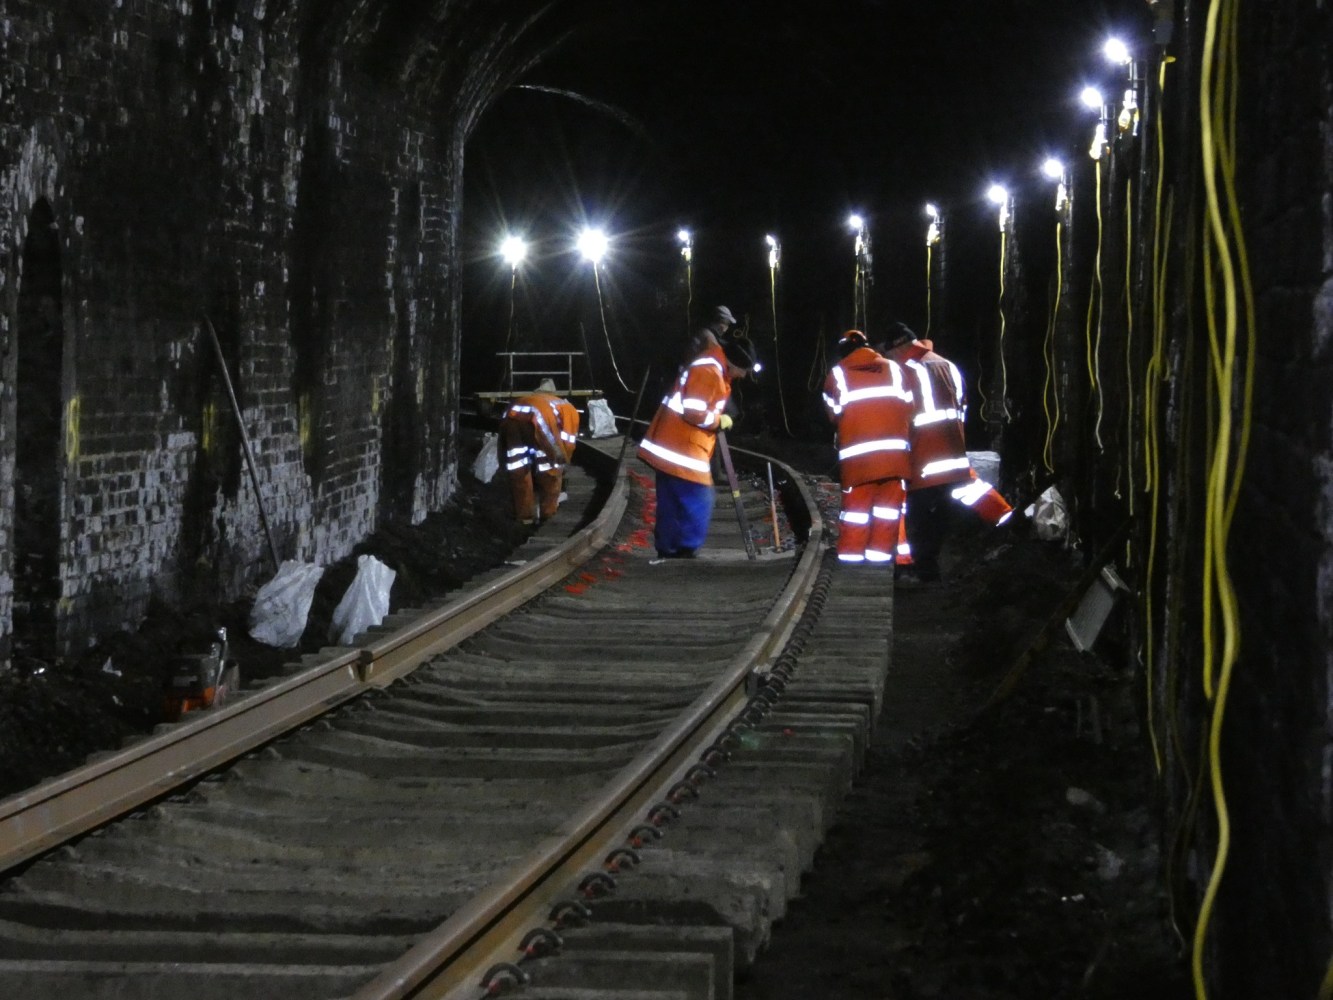 a group of people working on railway tracks inside a tunnel